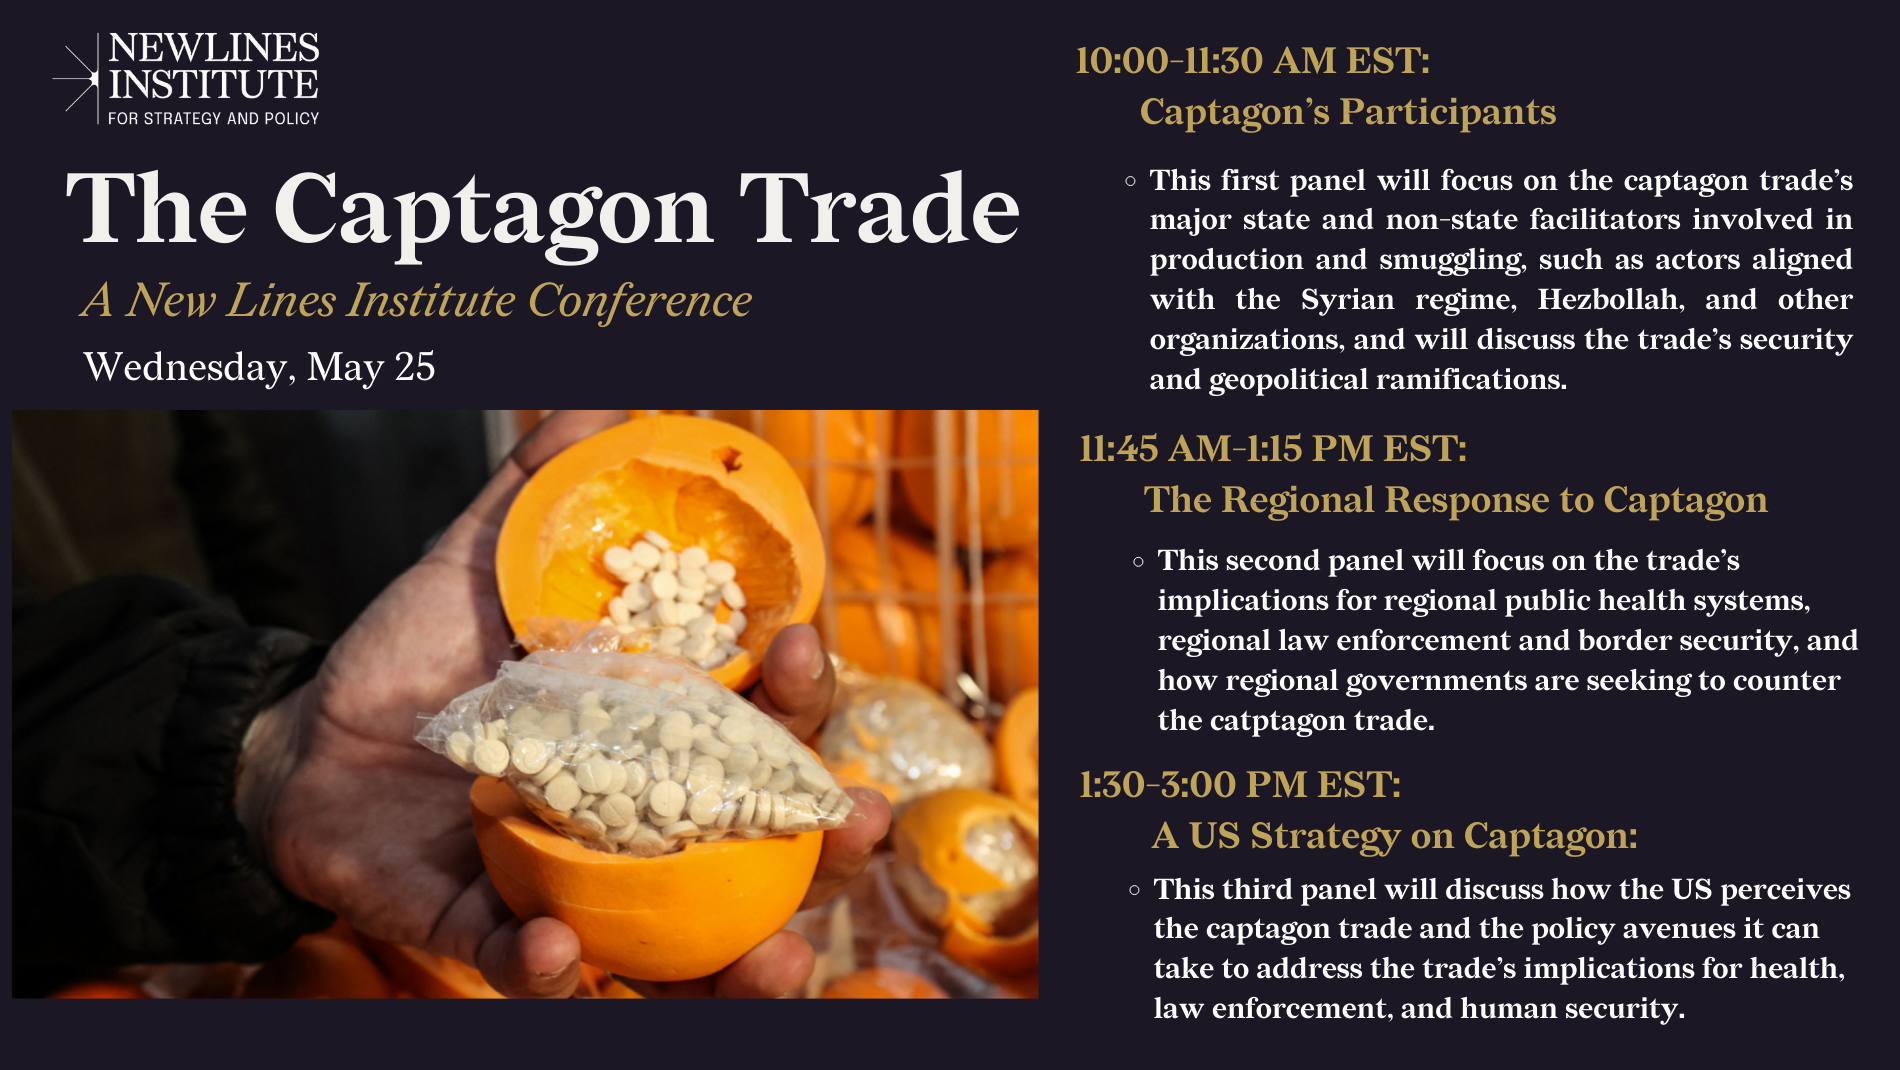 The Captagon Trade Conference